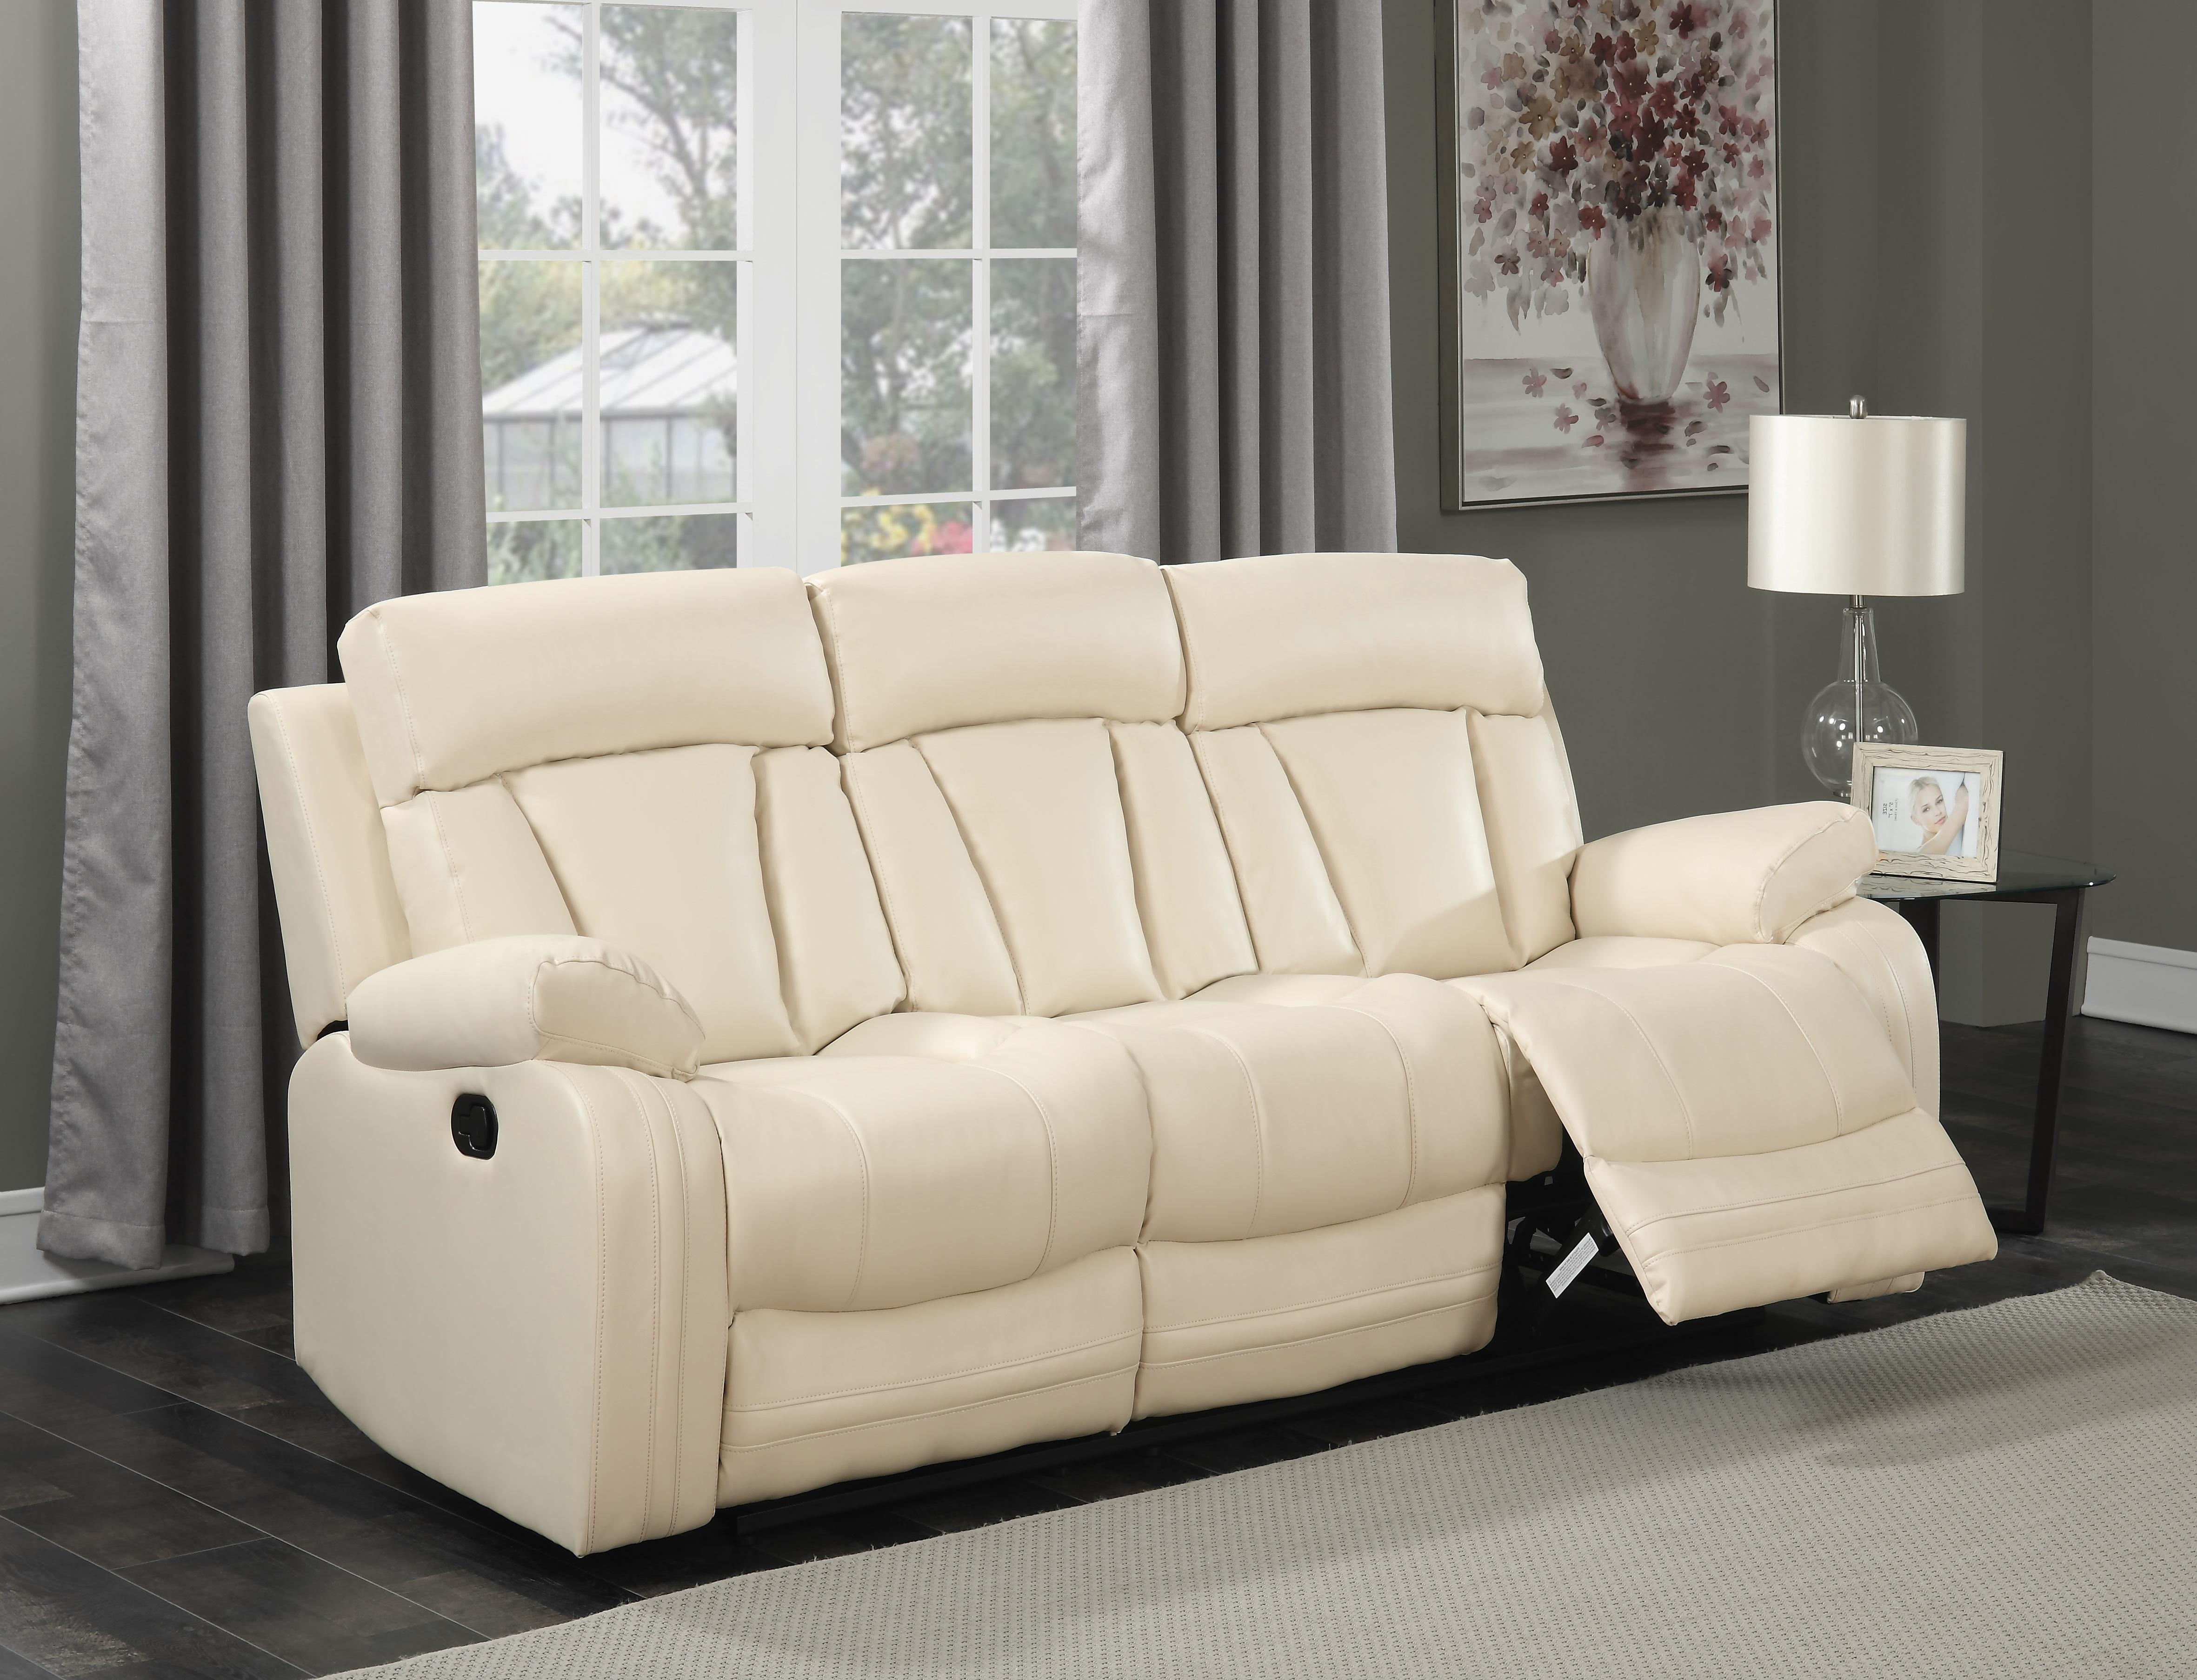 

    
Meridian 645 Avery Beige Bonded Leather Reclining Sofa Set 2Pcs Contemporary
